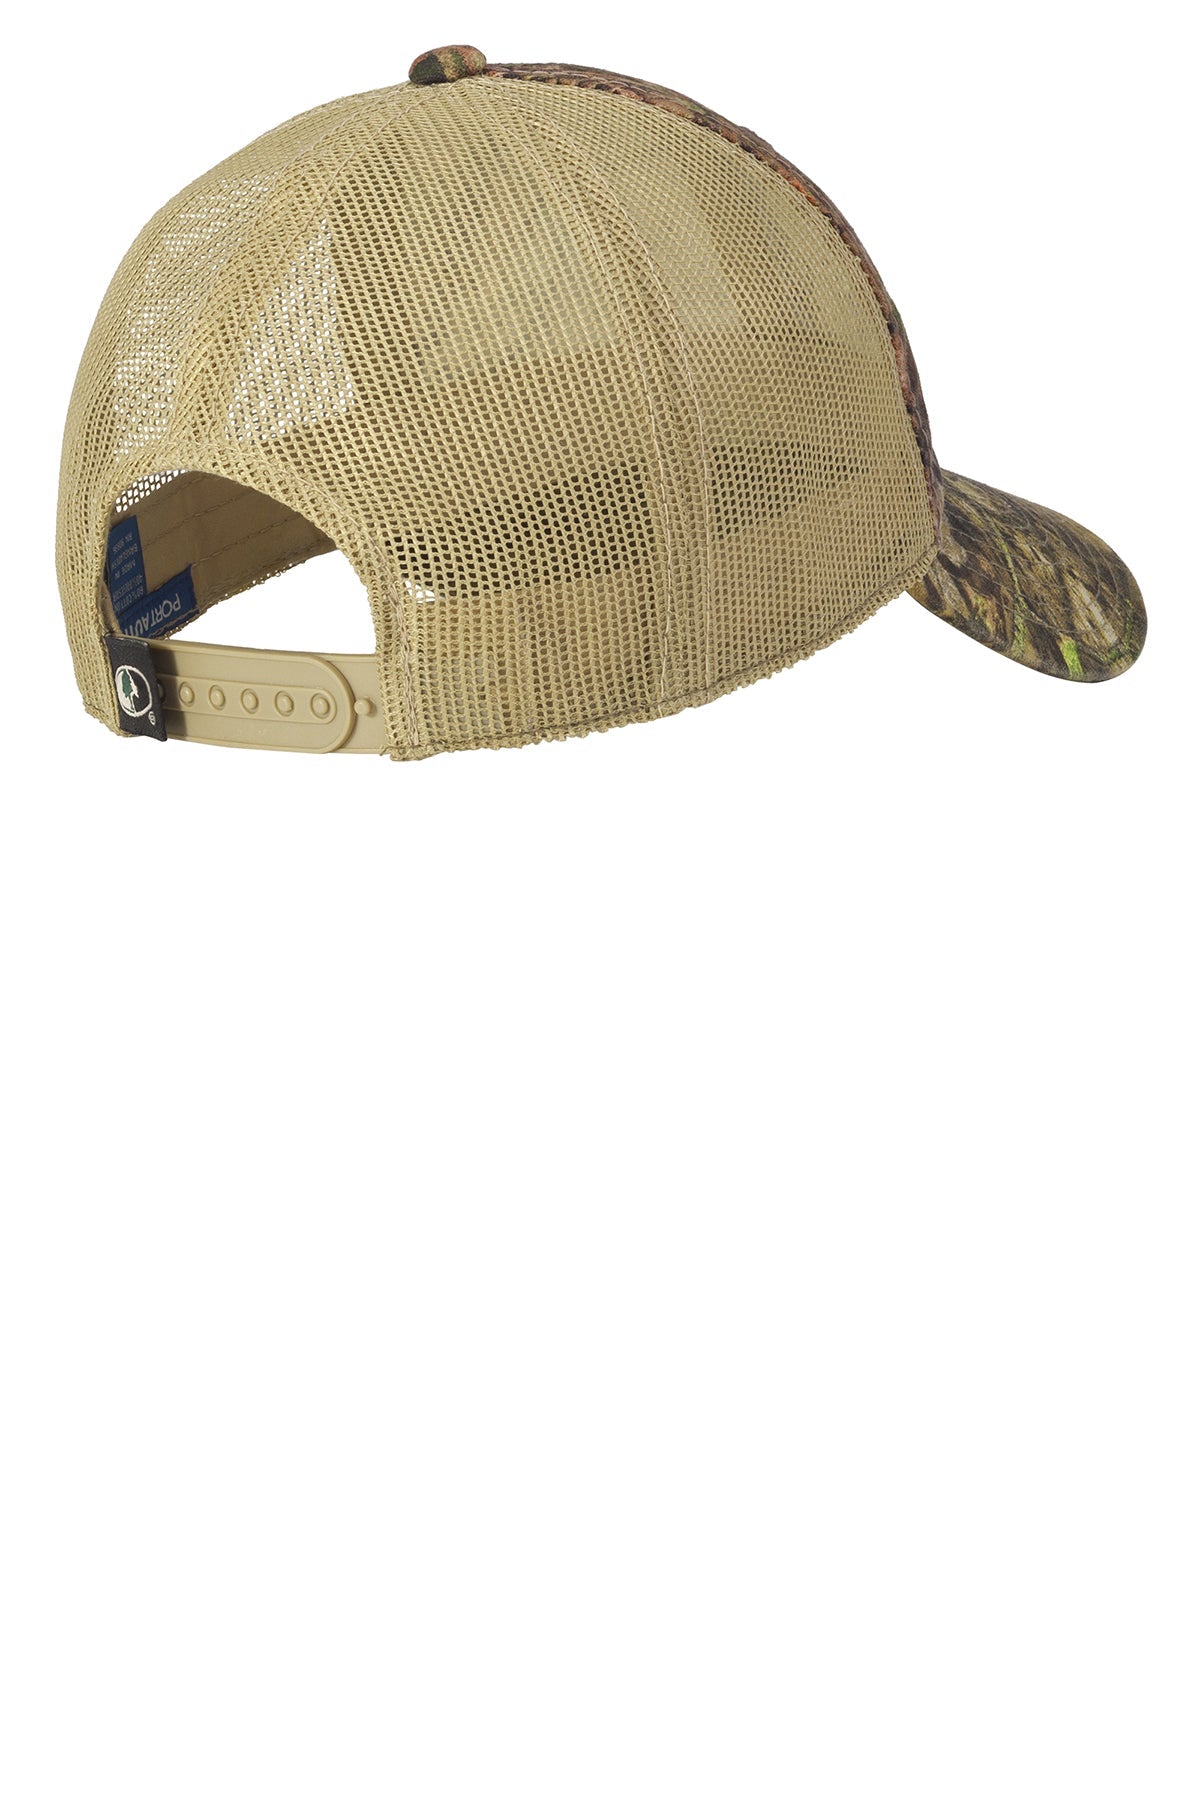 Port Authority Unstructured Camouflage Mesh Back Branded Caps, Mossy Oak Break Up Country/ Tan